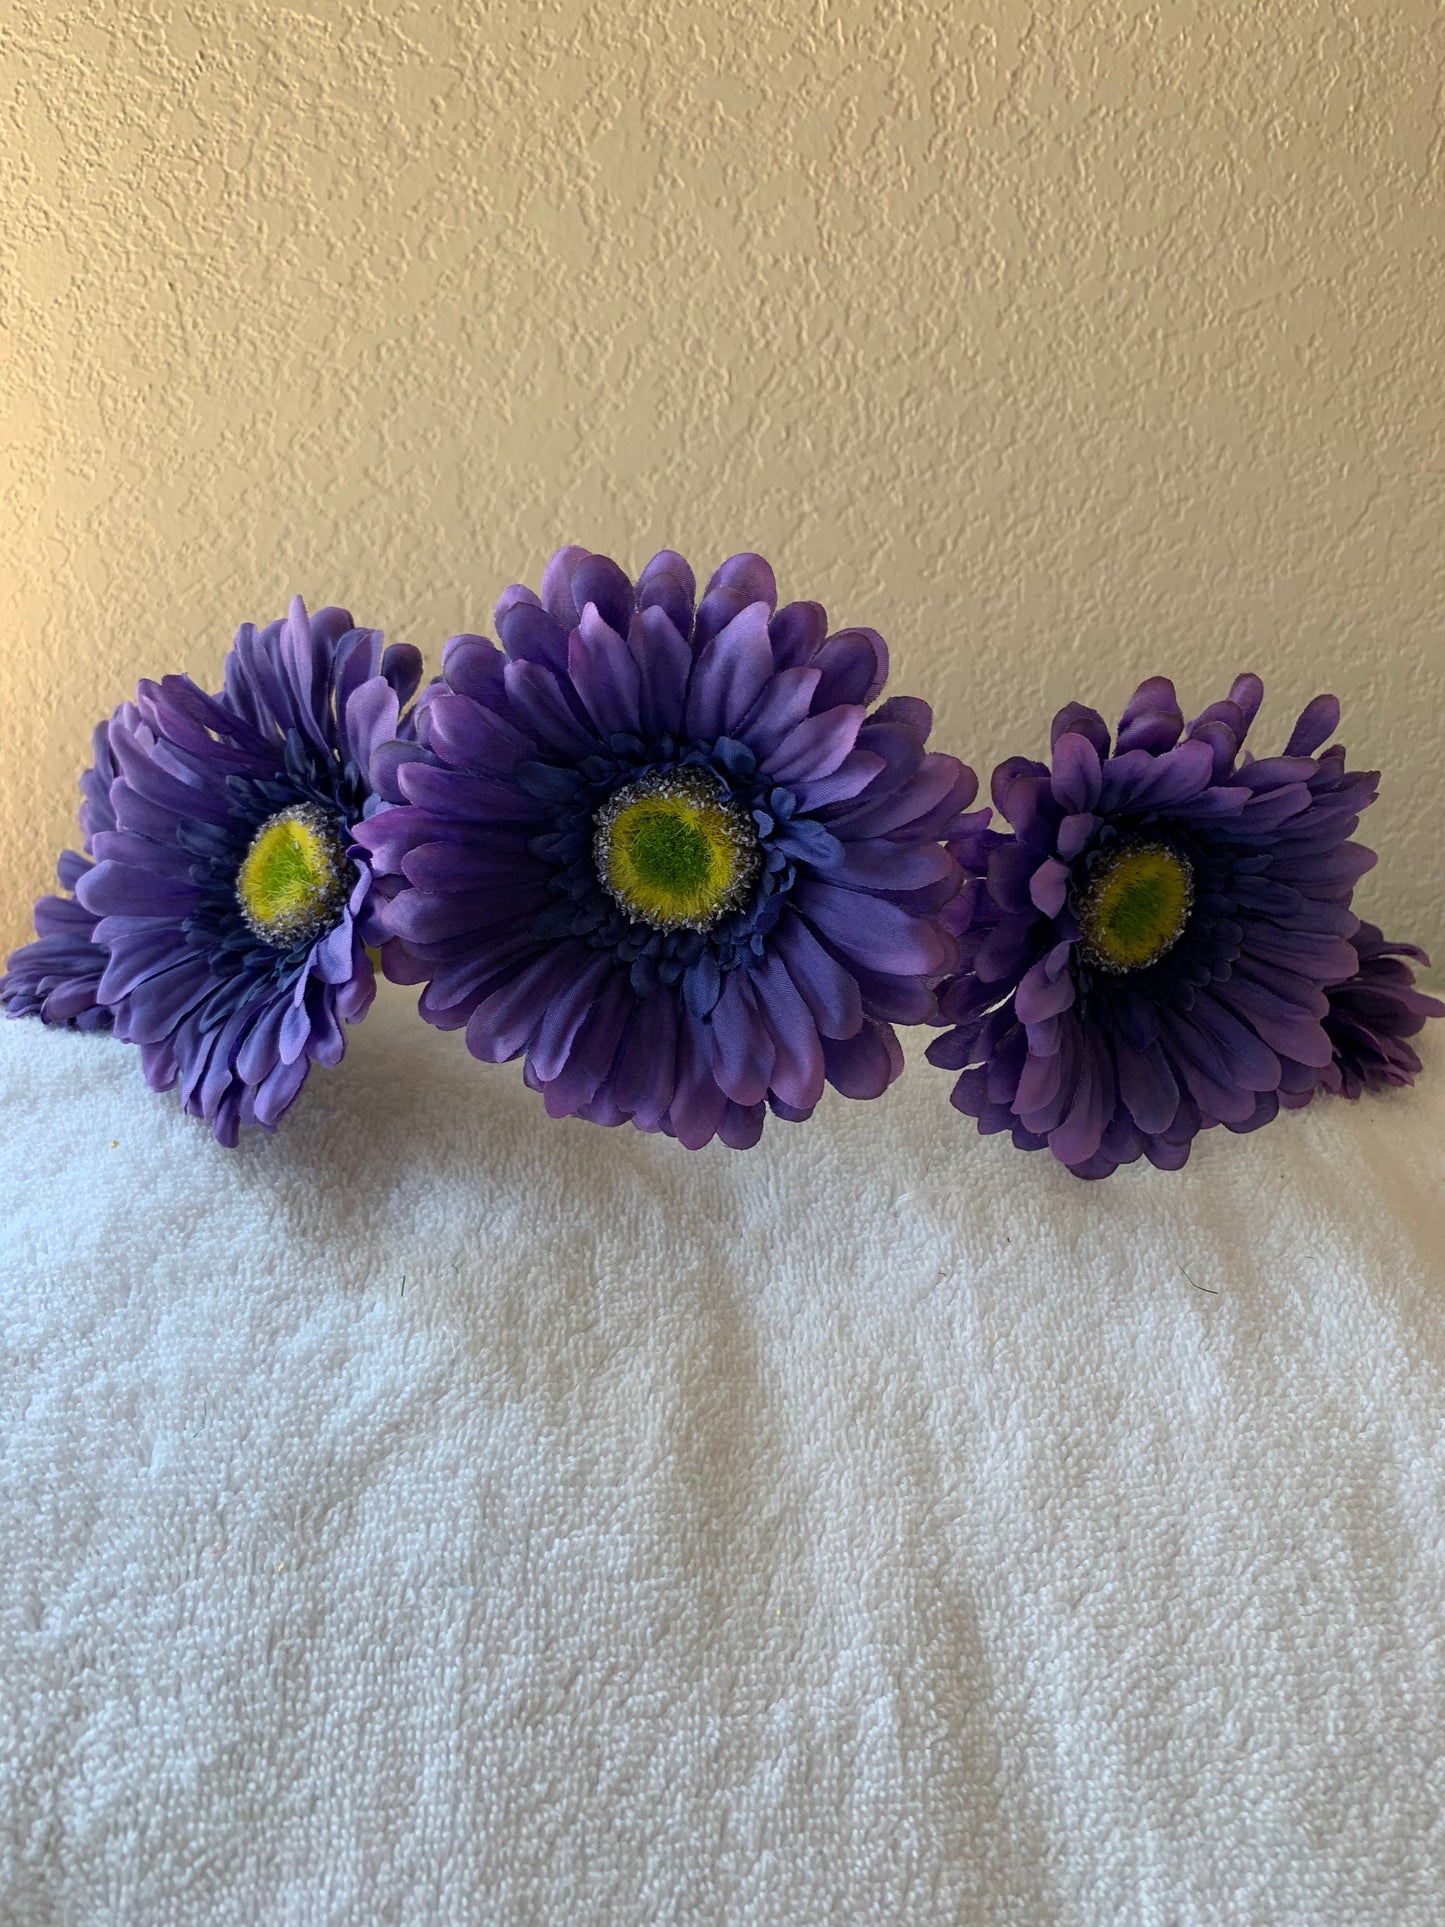 Large Wreath Lighted - All Purple Daisies